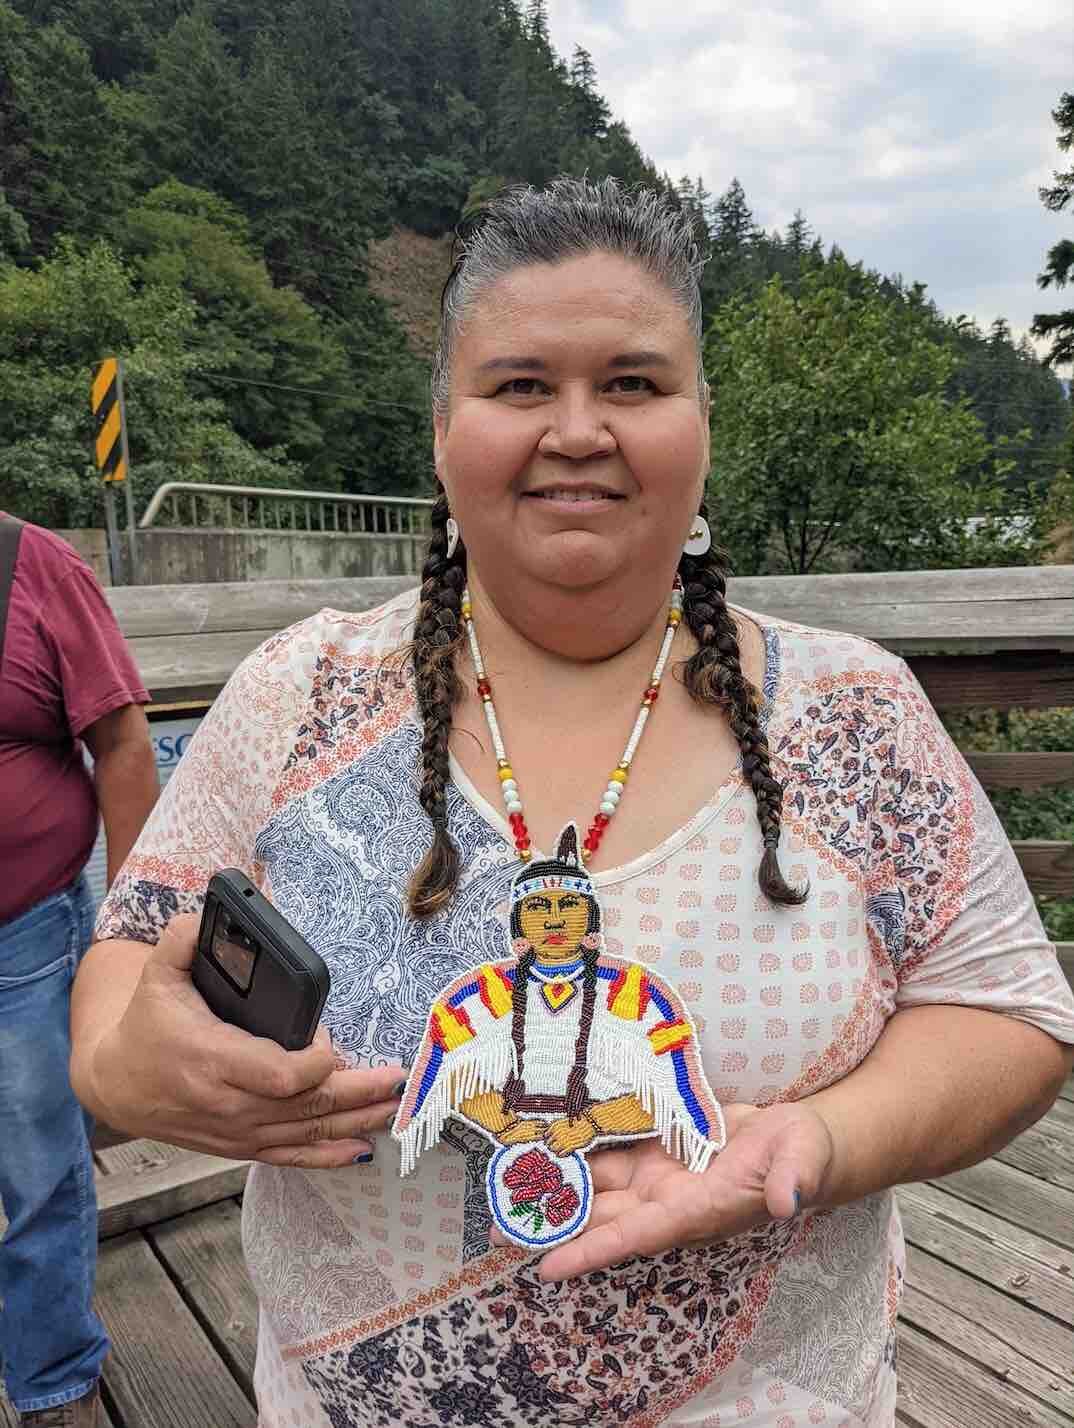 Donella Miller, Yakama Nation Fisheries Program Manager, shared the story of the jewelery she wore to the vigil, saying it was a handmade portrait of her grandmother. 